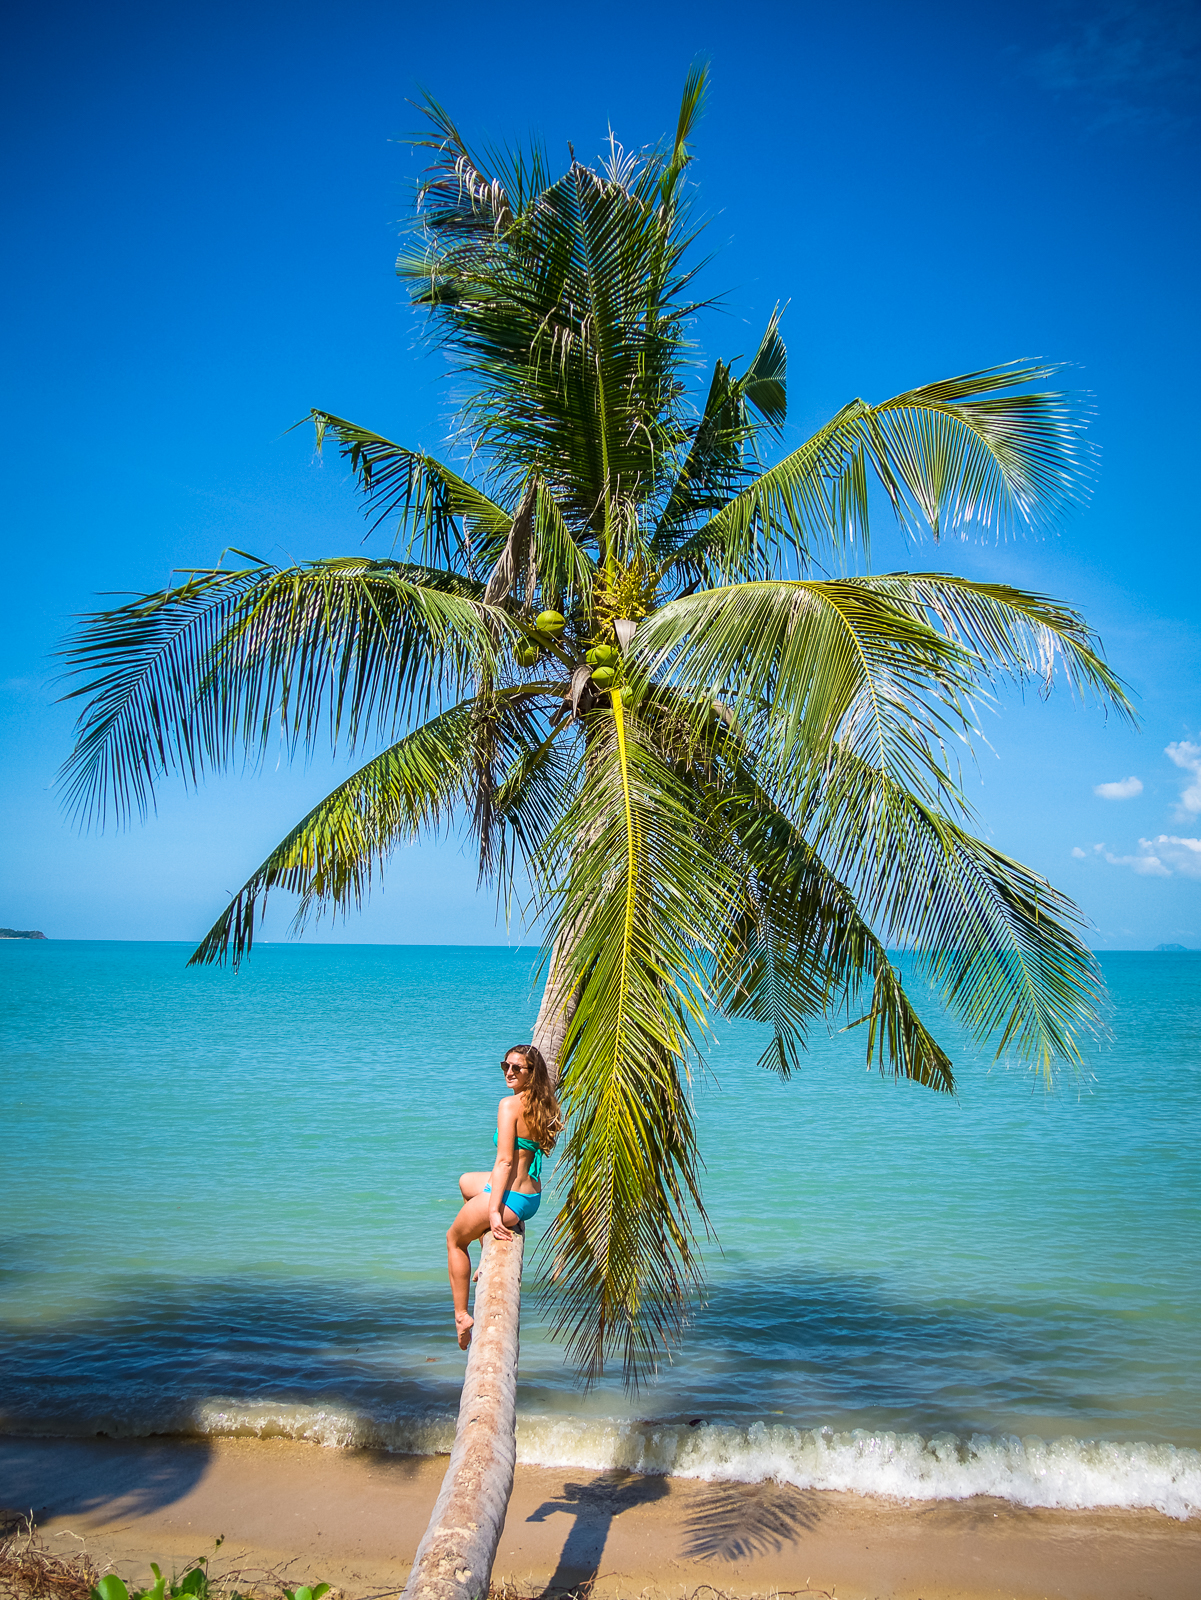 Palm tree over water in Koh Samui, Thailand